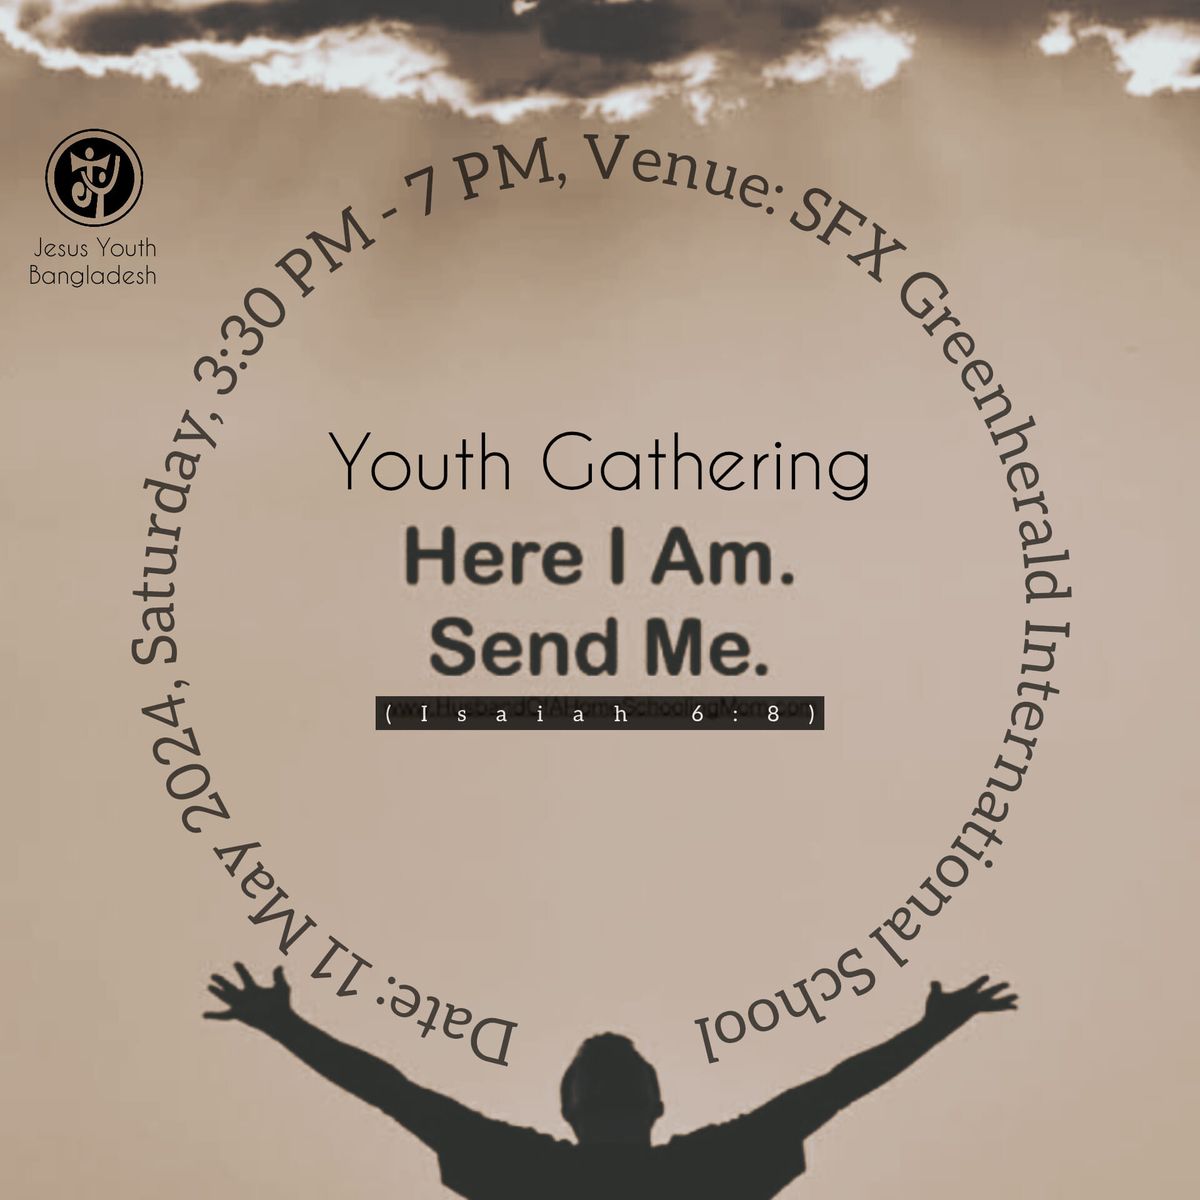 Youth Gathering: "Here I am, send me"